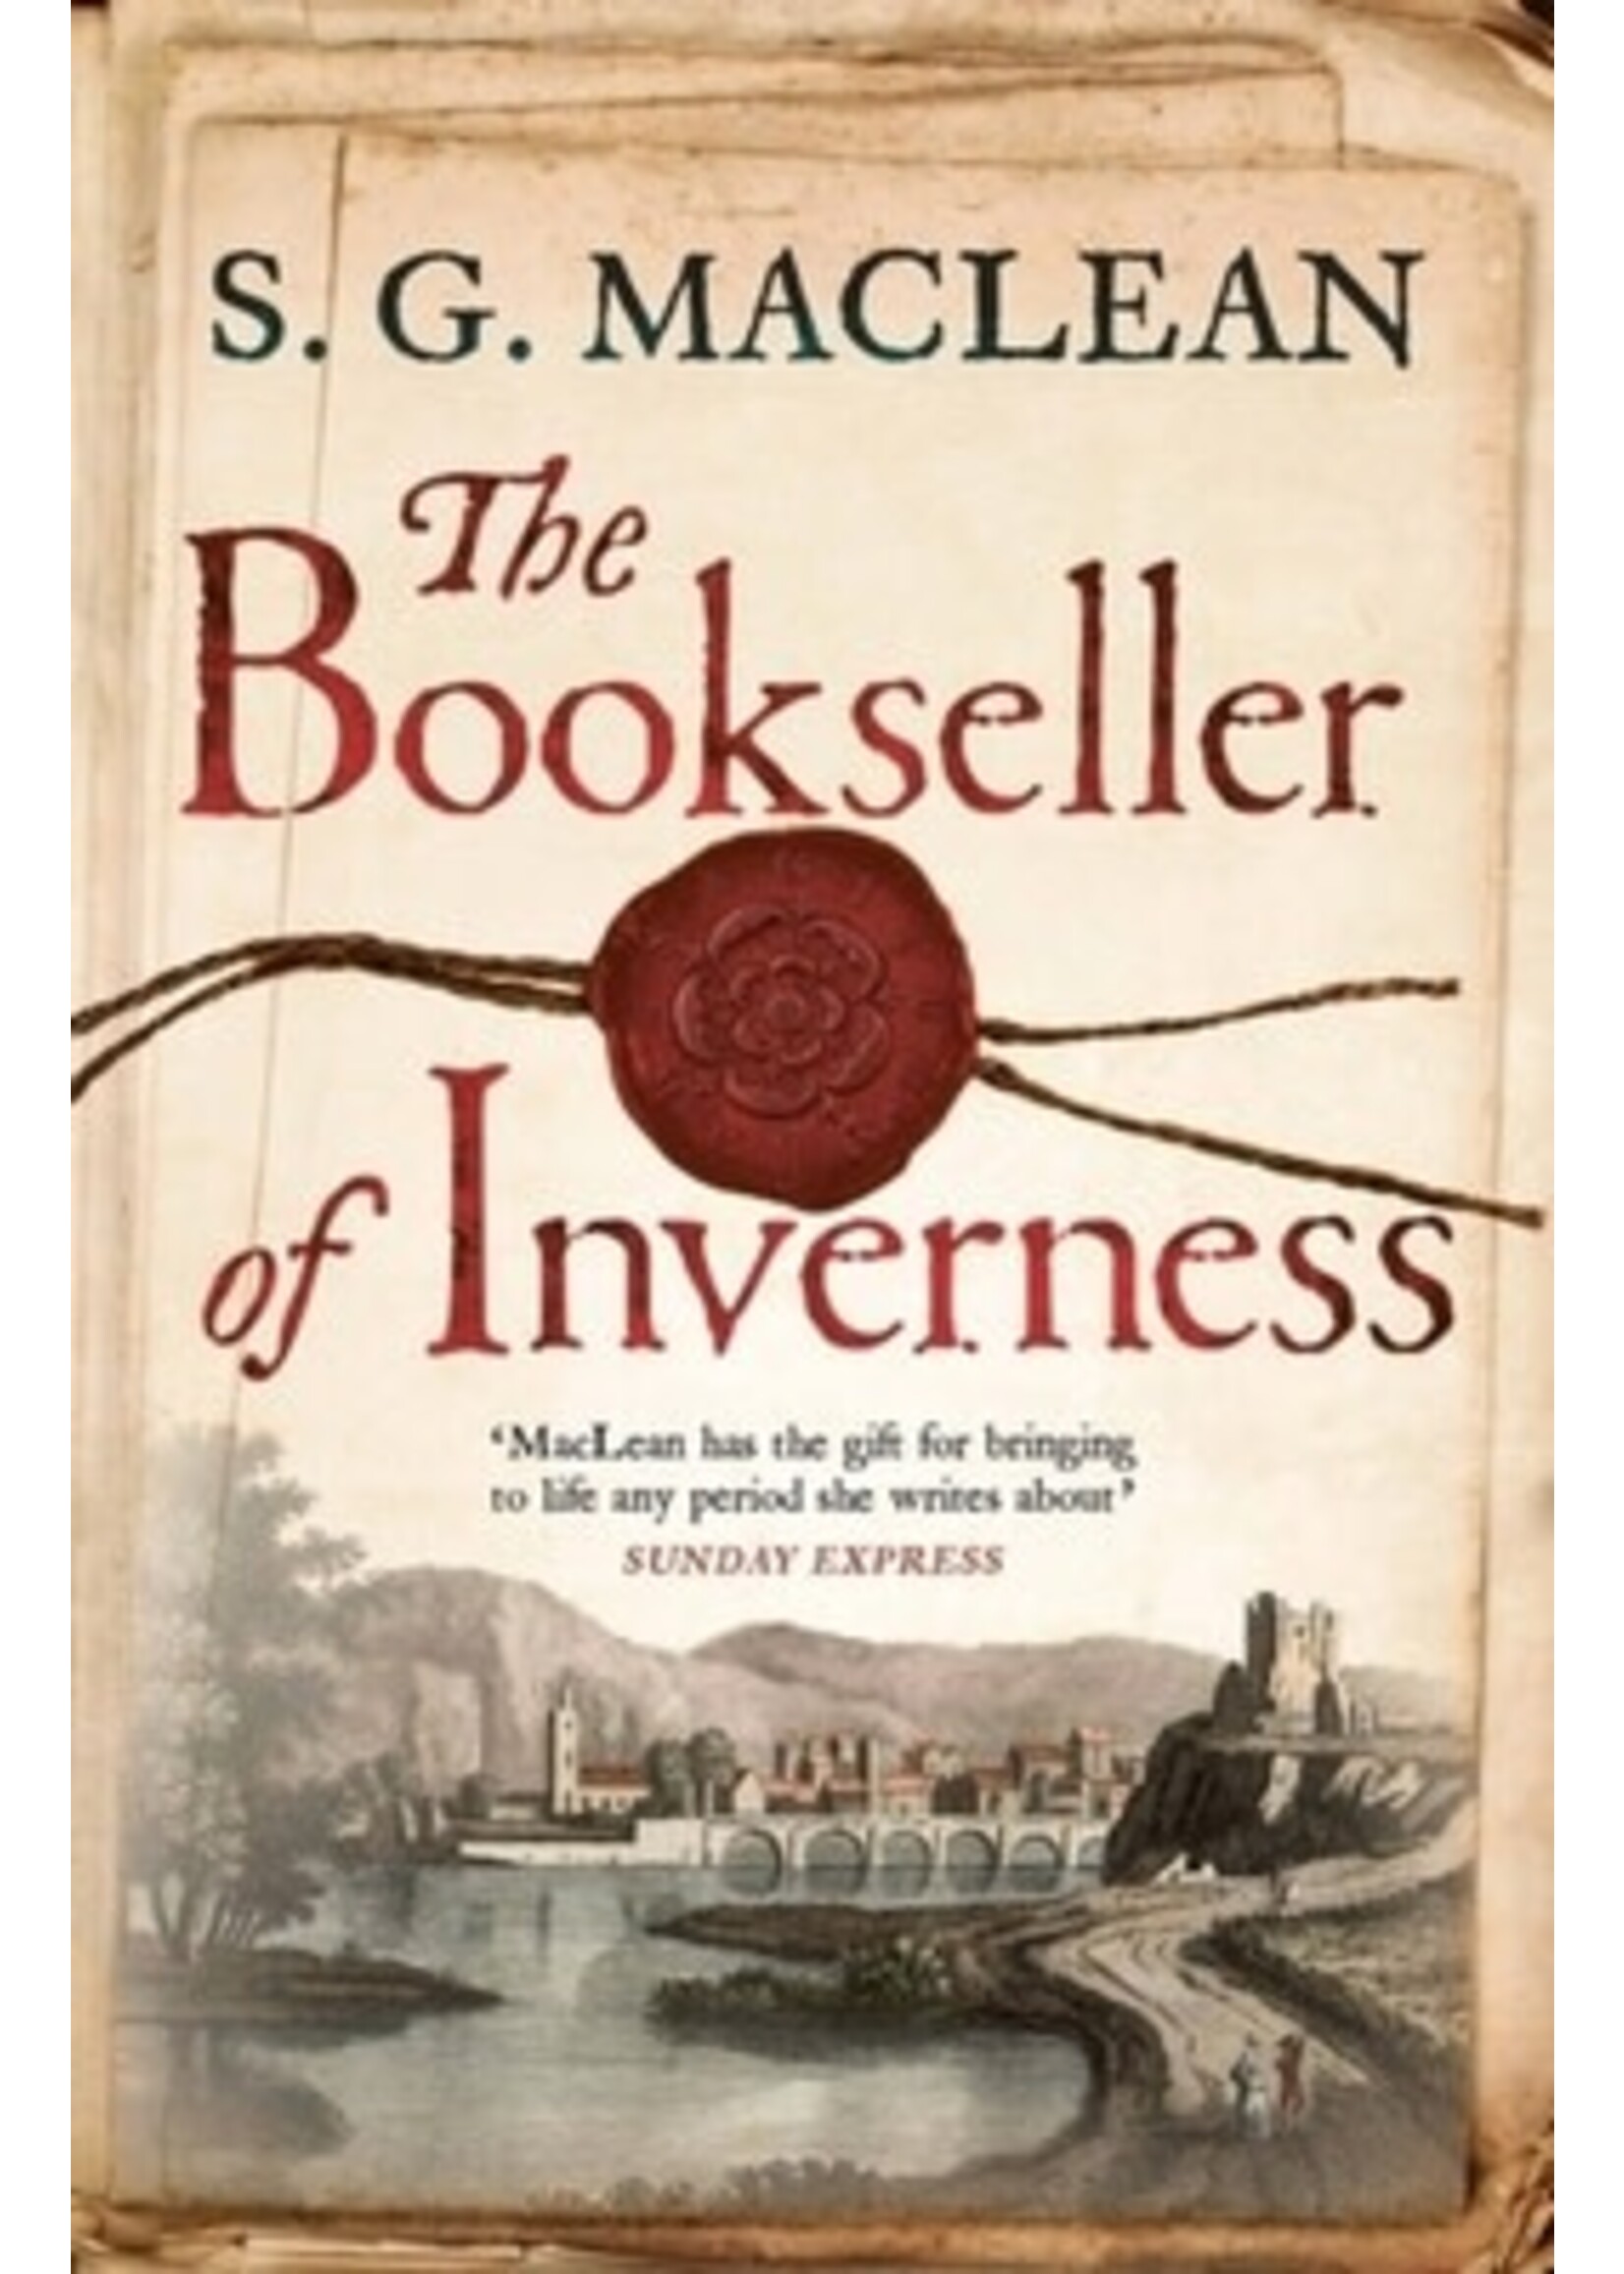 The Bookseller of Inverness by S.G. MacLean